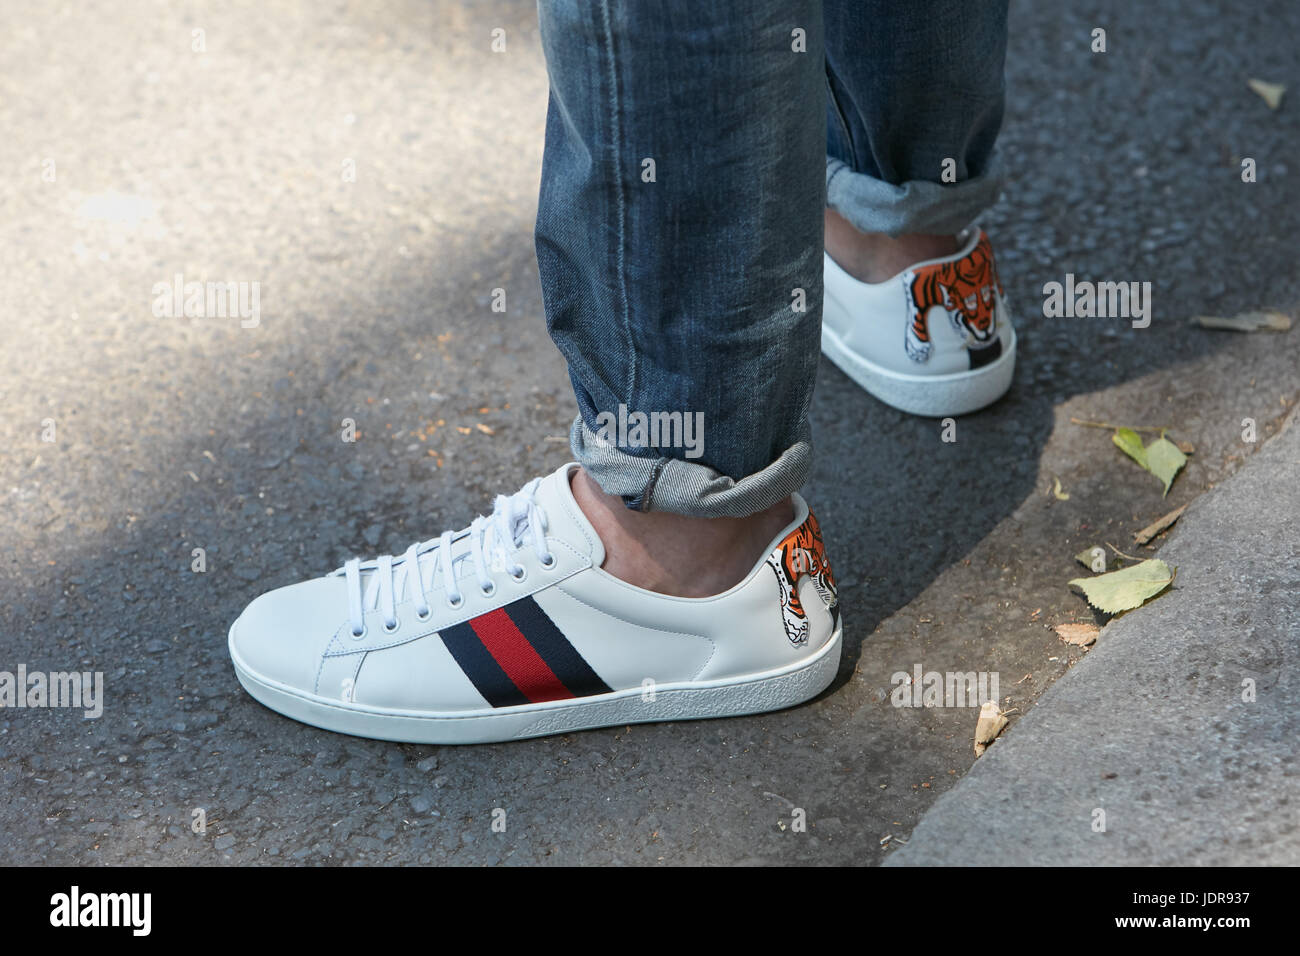 gucci sneakers style